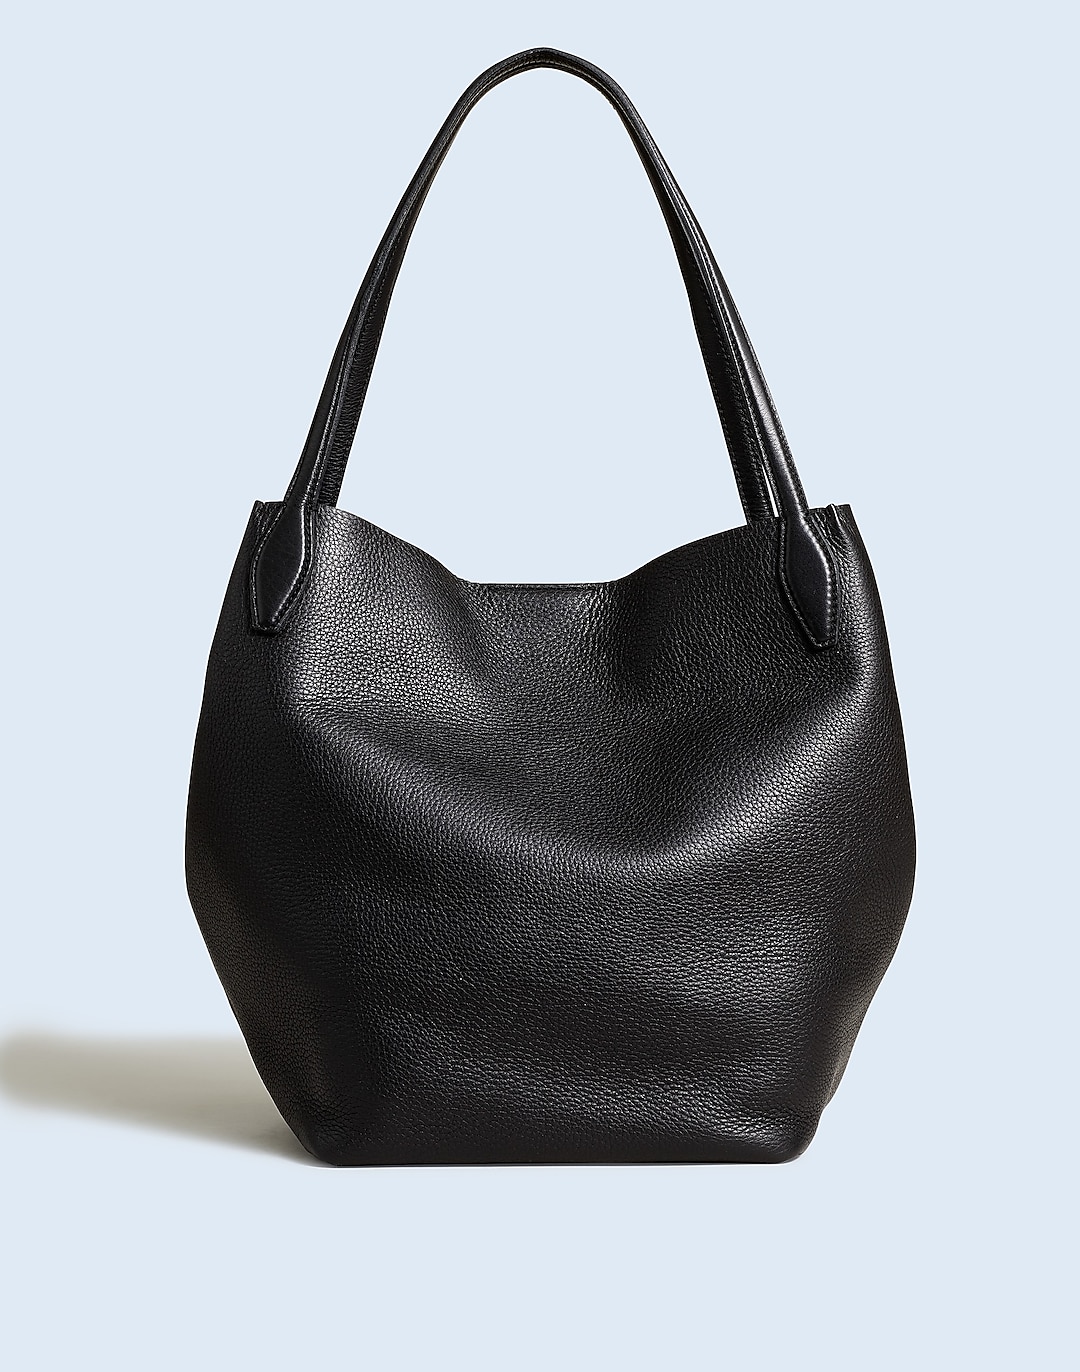 The Shopper Tote in Soft Grain Pebbled Leather | Madewell